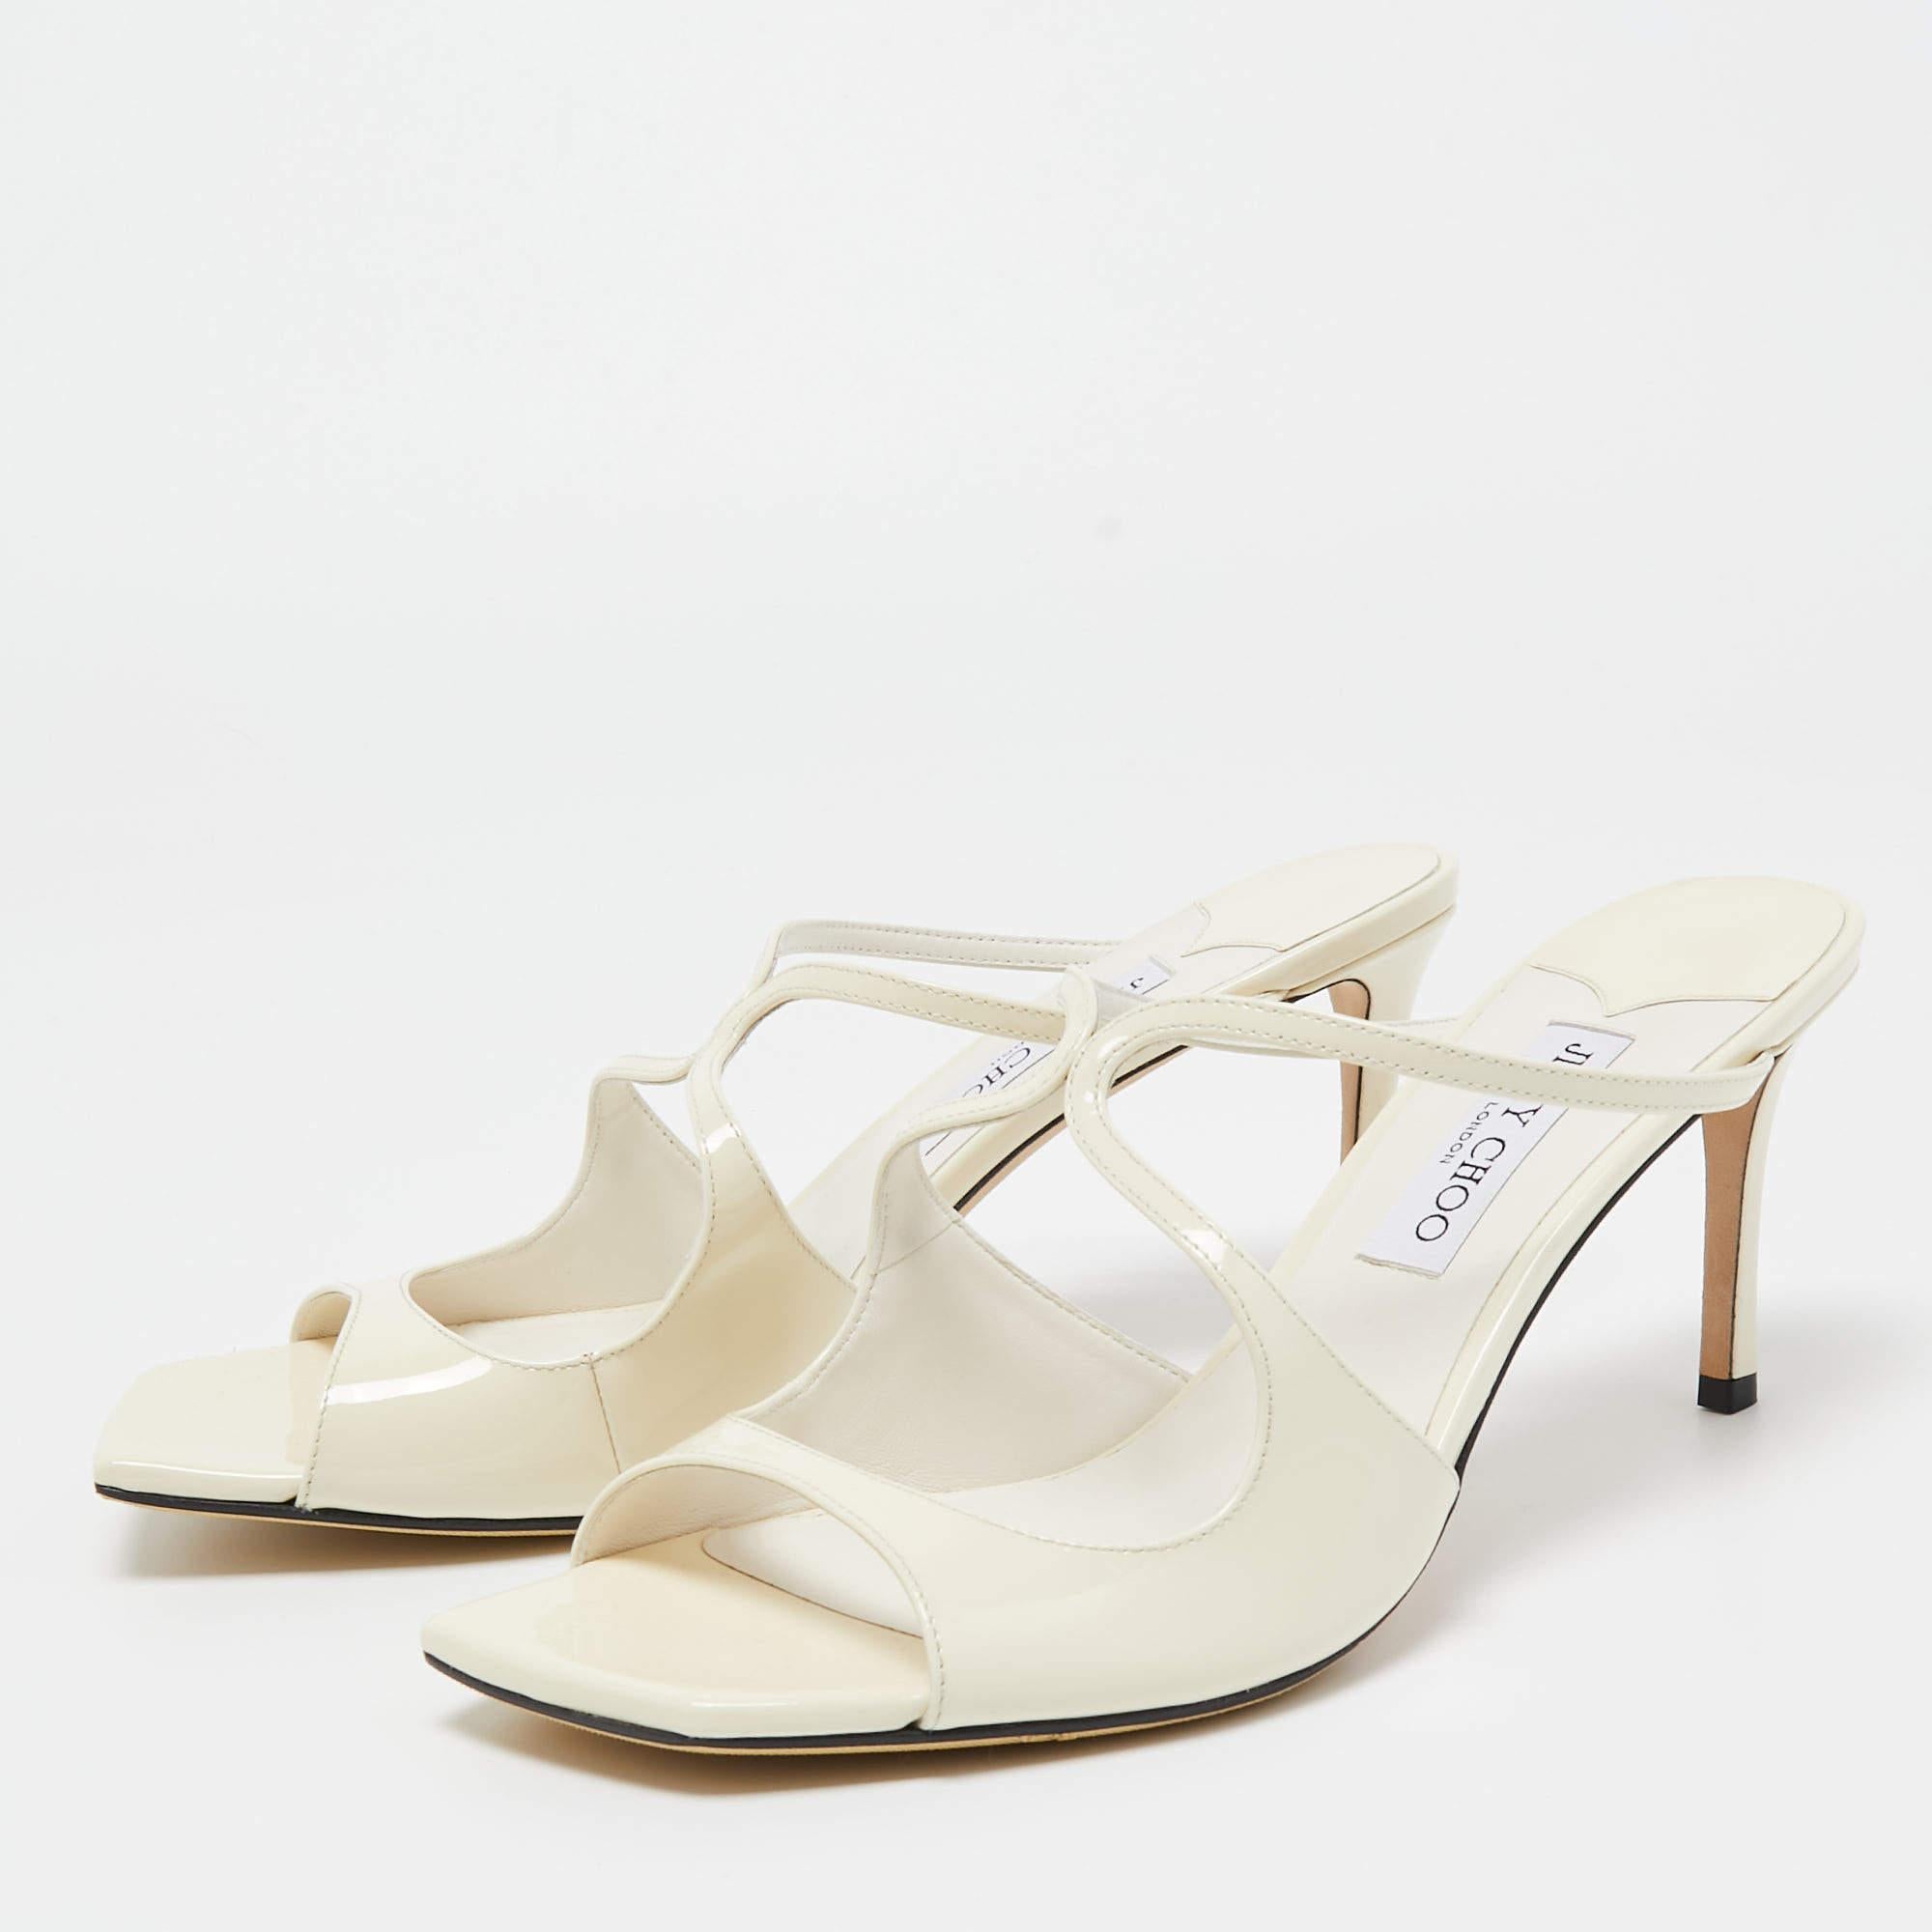 Women's Jimmy Choo Off White Patent Leather Anise Sandals Size 42